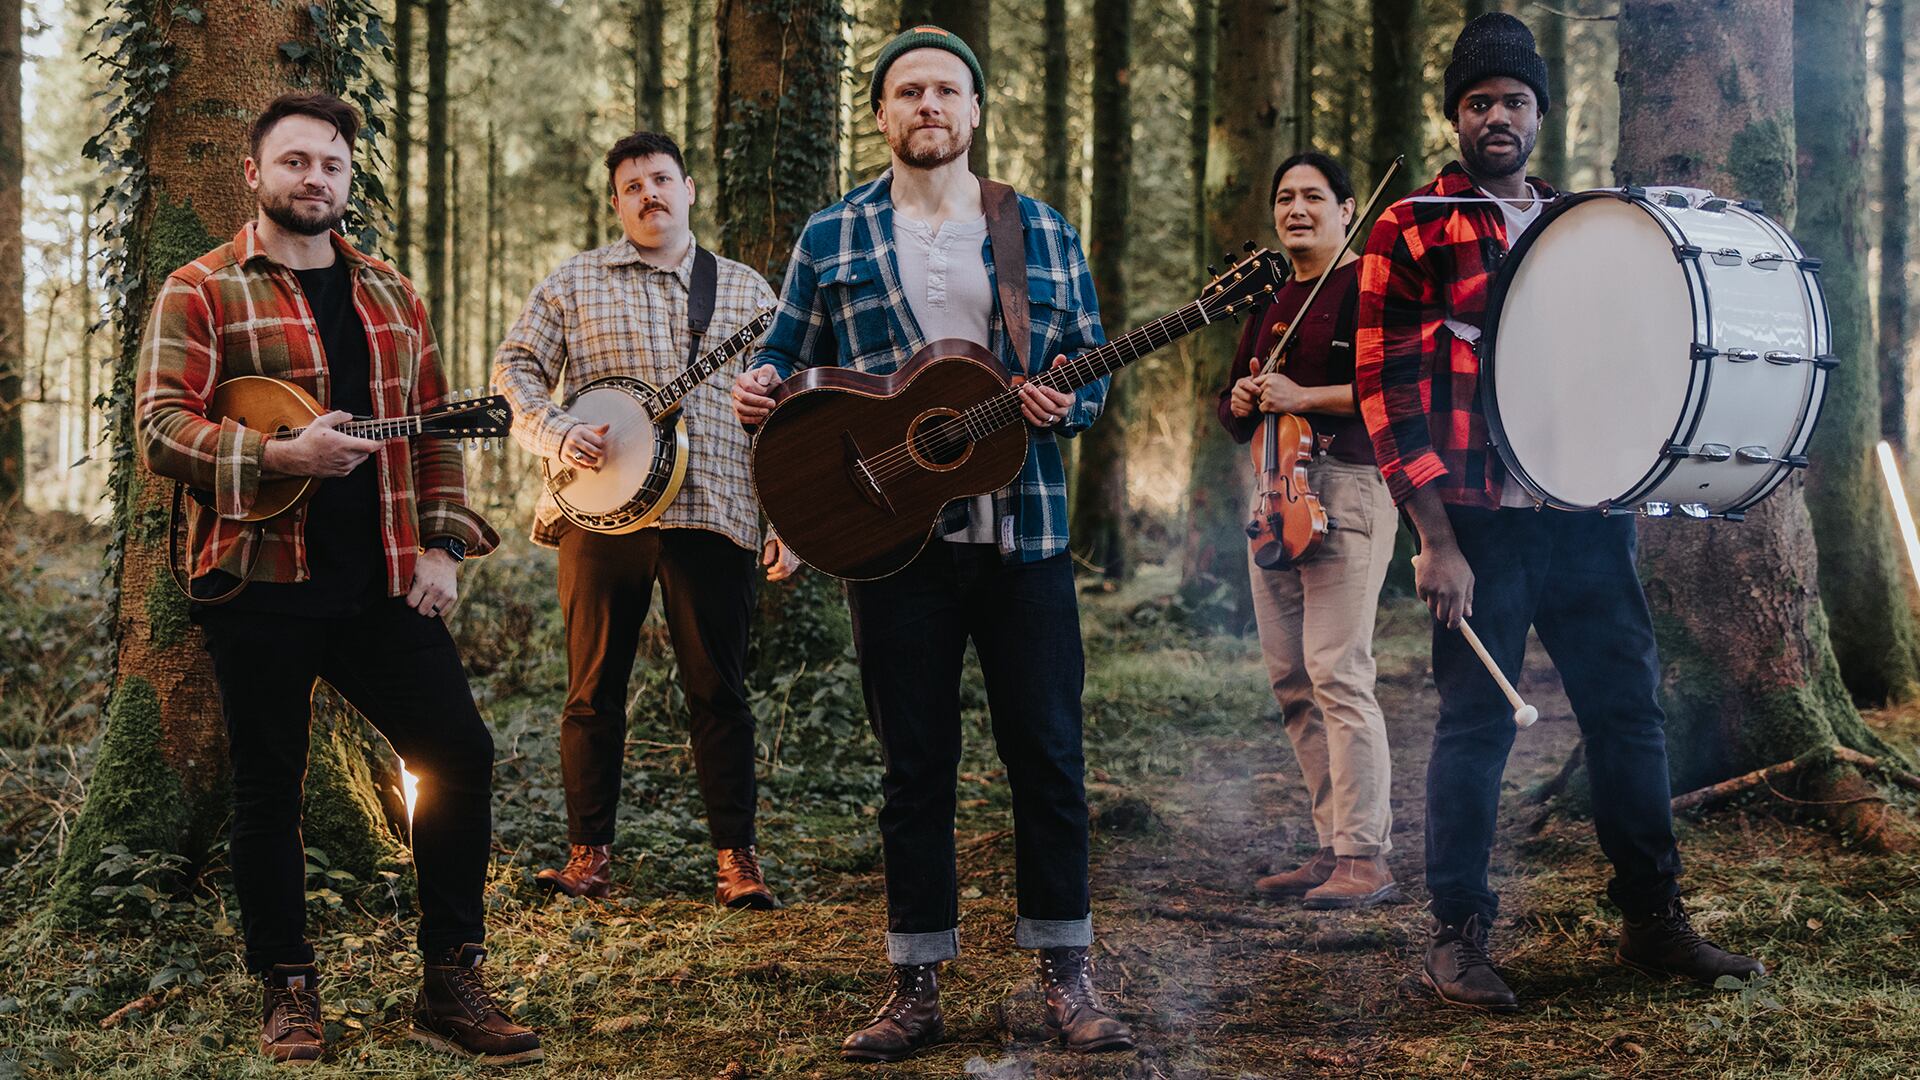 Rend Collective’s current line-up Will Pearce, Stephen Mitchell, Chris Llewellyn, Jonathan Chu and Daniel Jones